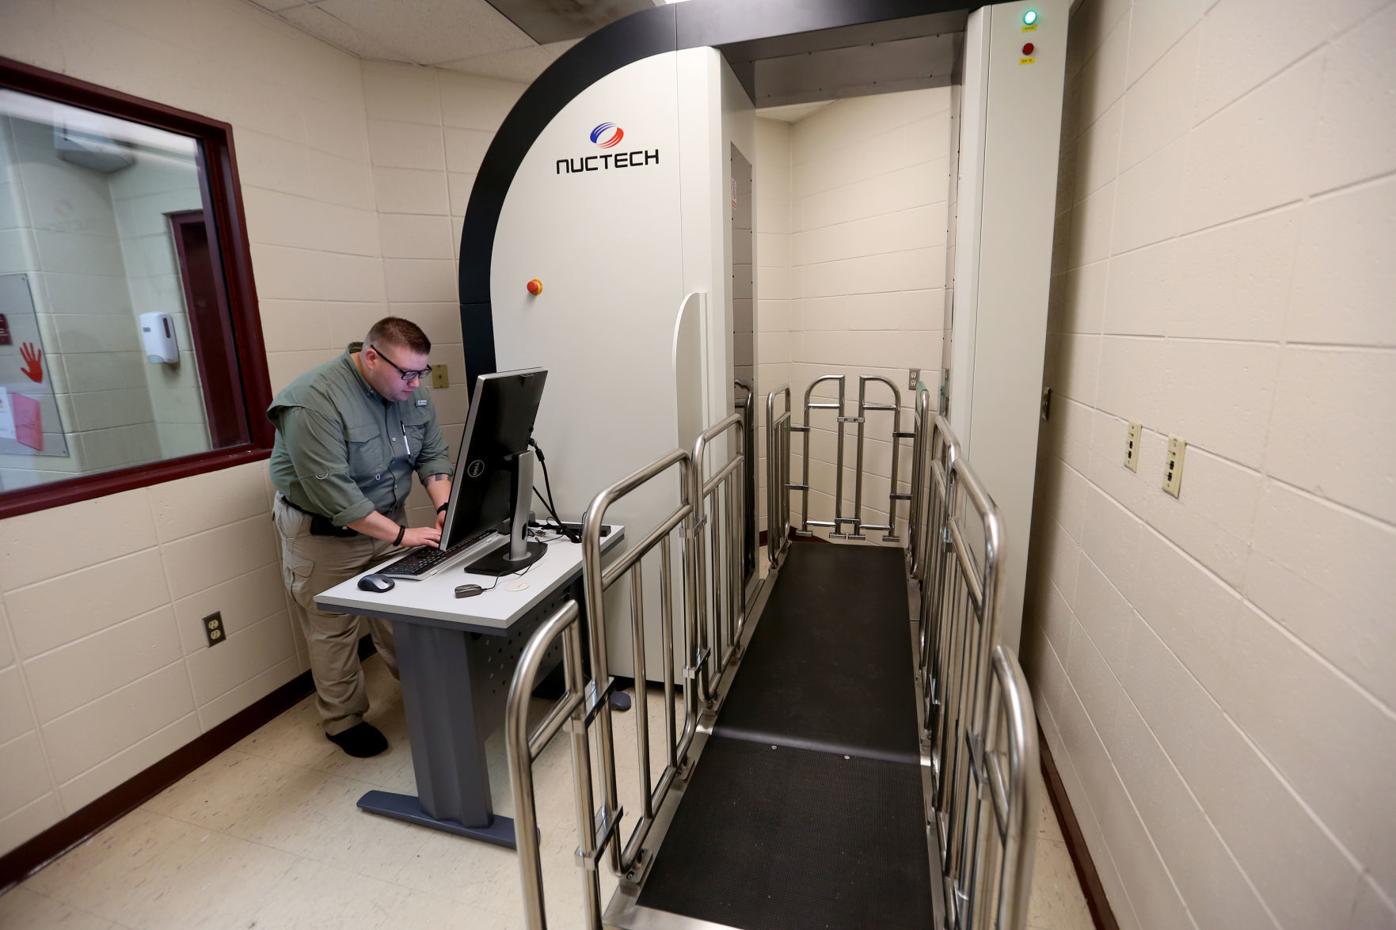 County puts body scanner to test at jail